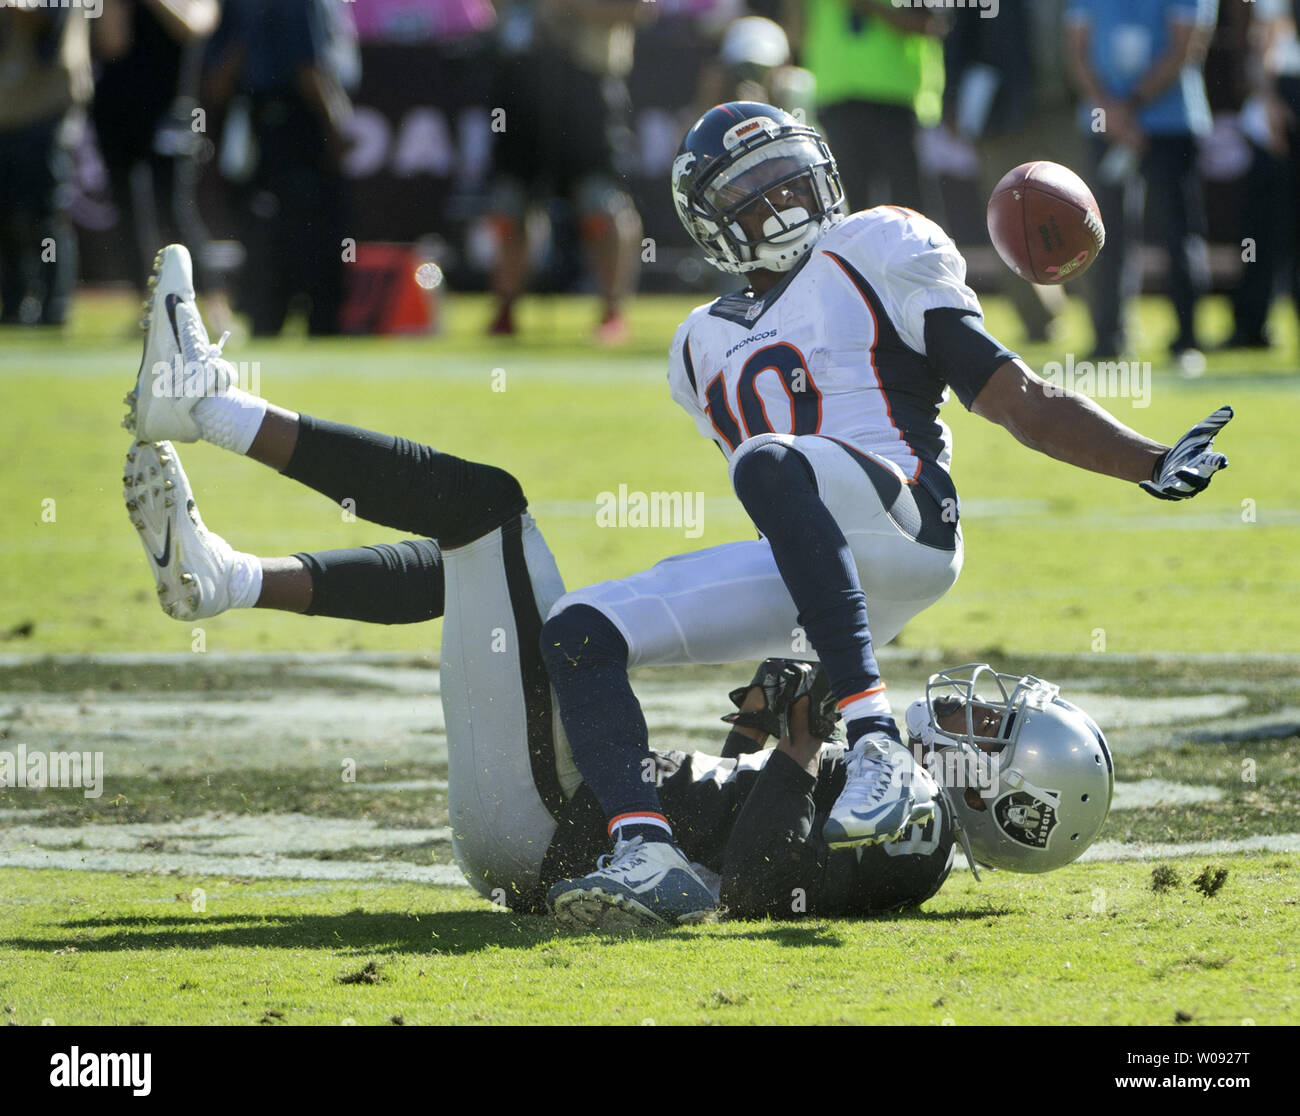 Denver Broncos Emmanuel Sanders (R) tries to hold on to a Peyton Manning pass as he is hit by Oakland Raiders David Amerson (29) in the third quarter at O.co Coliseum in Oakland, California on October 11, 2015. The Broncos defeated the Raiders 16-10.  Photo by Terry Schmitt/UPI Stock Photo